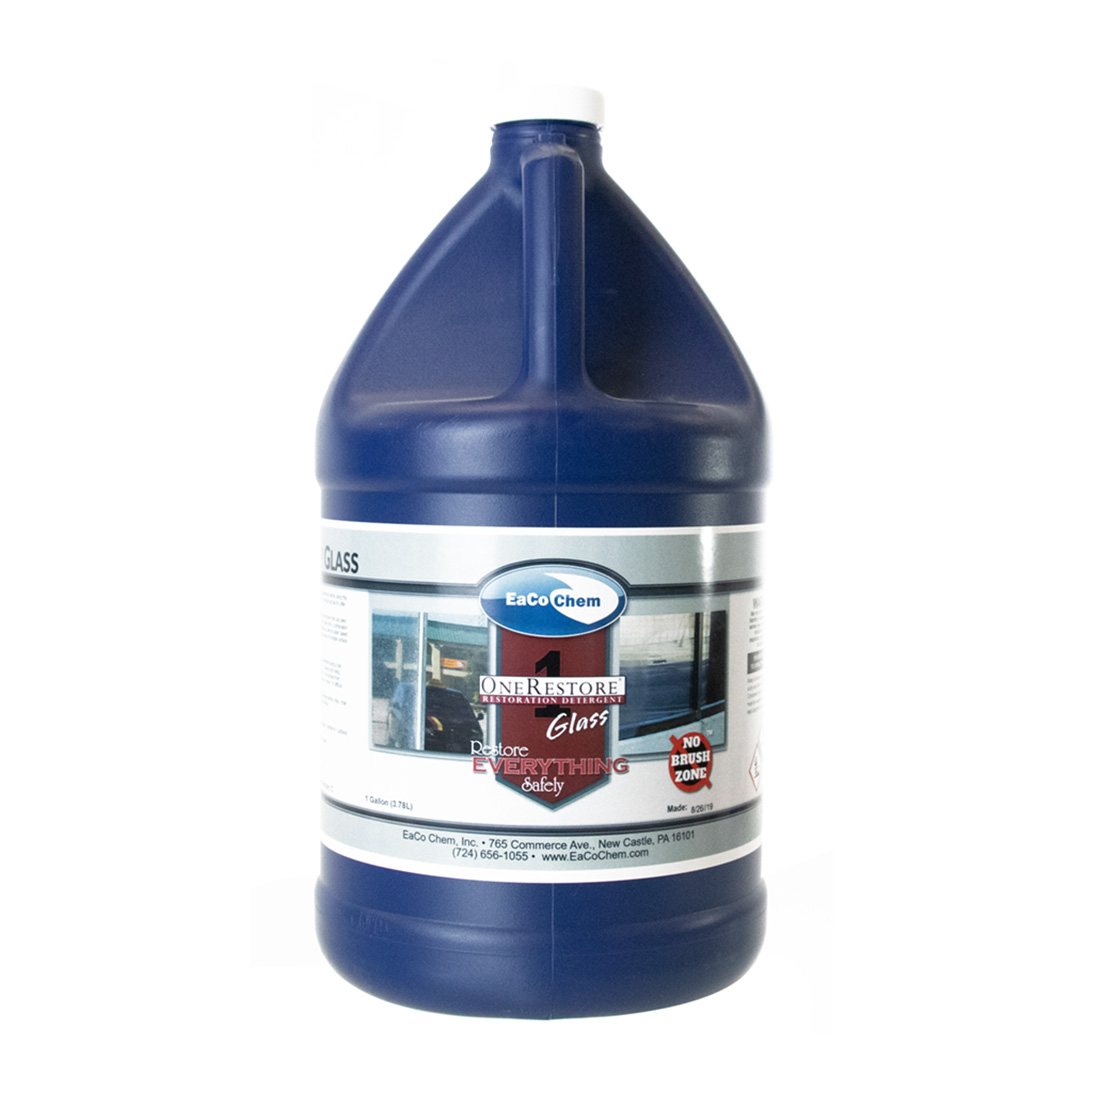 Brite Glass and Acrylic Cleaner 16 oz